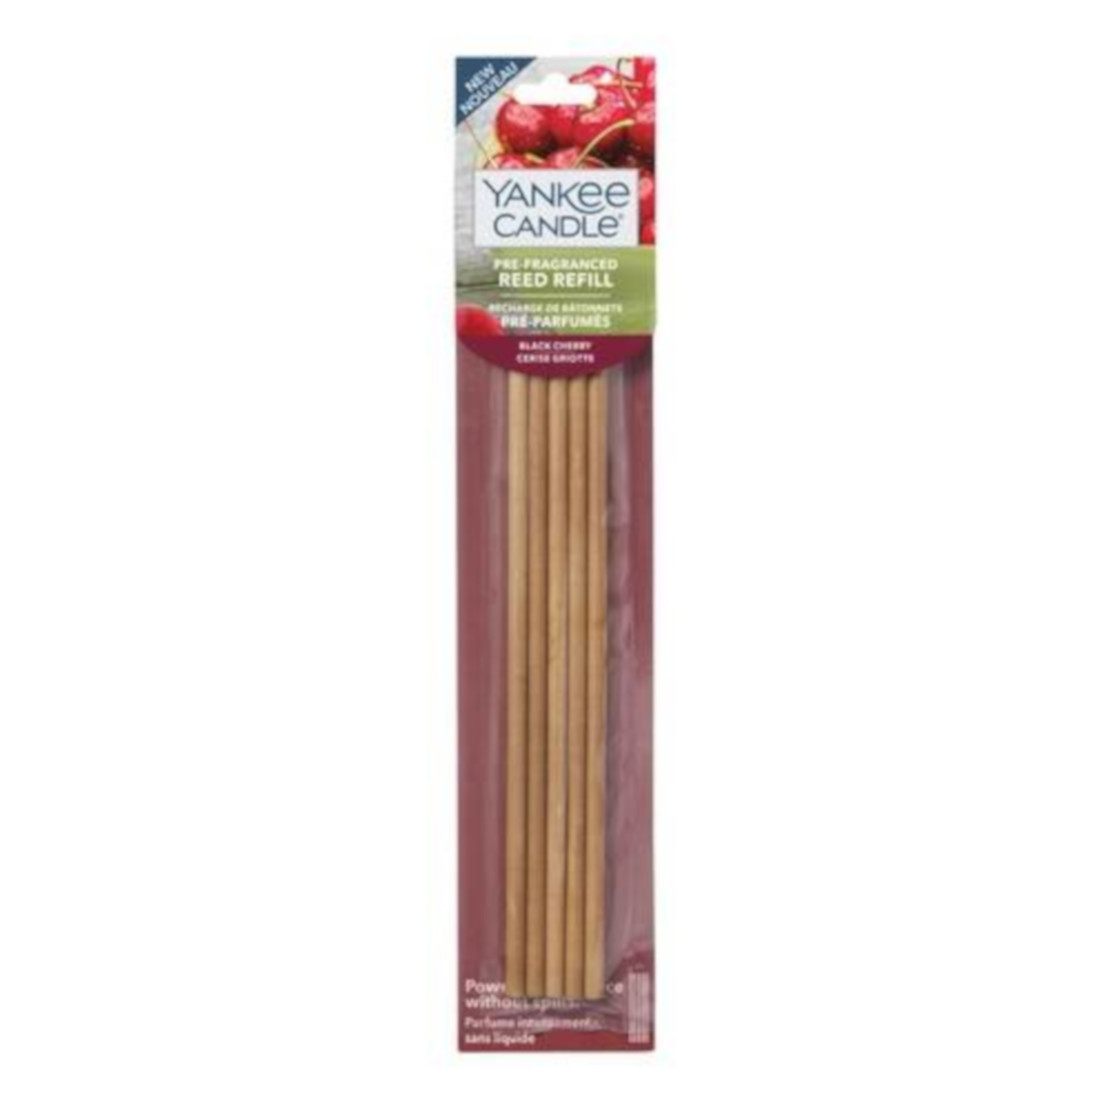 Yankee Candle Black Cherry Pre-Fragranced Reed Diffuser Refills